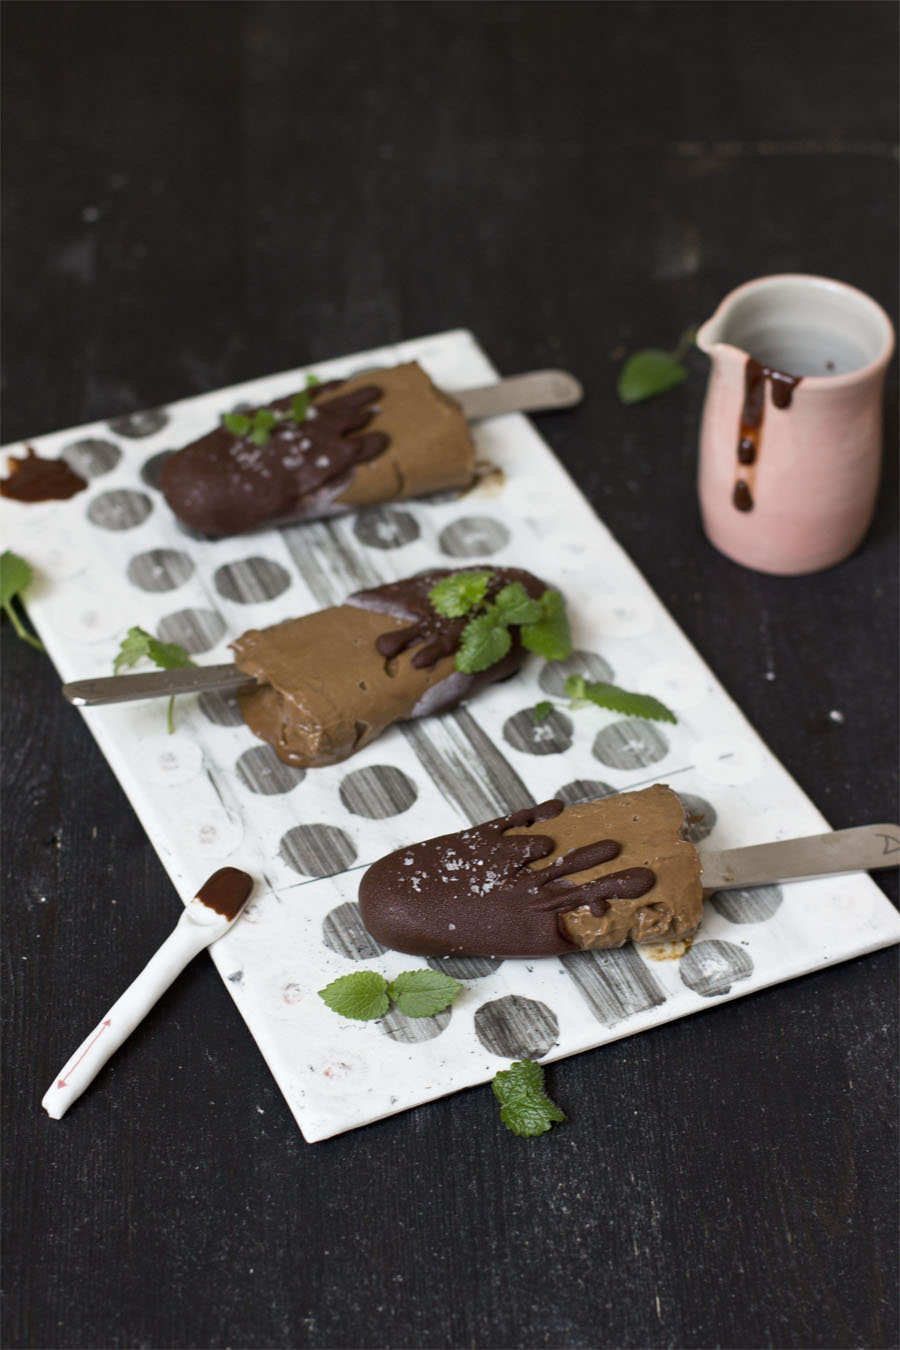 Rich chocolate avocado ice cream popsicle | LOOK WHAT I MADE ...